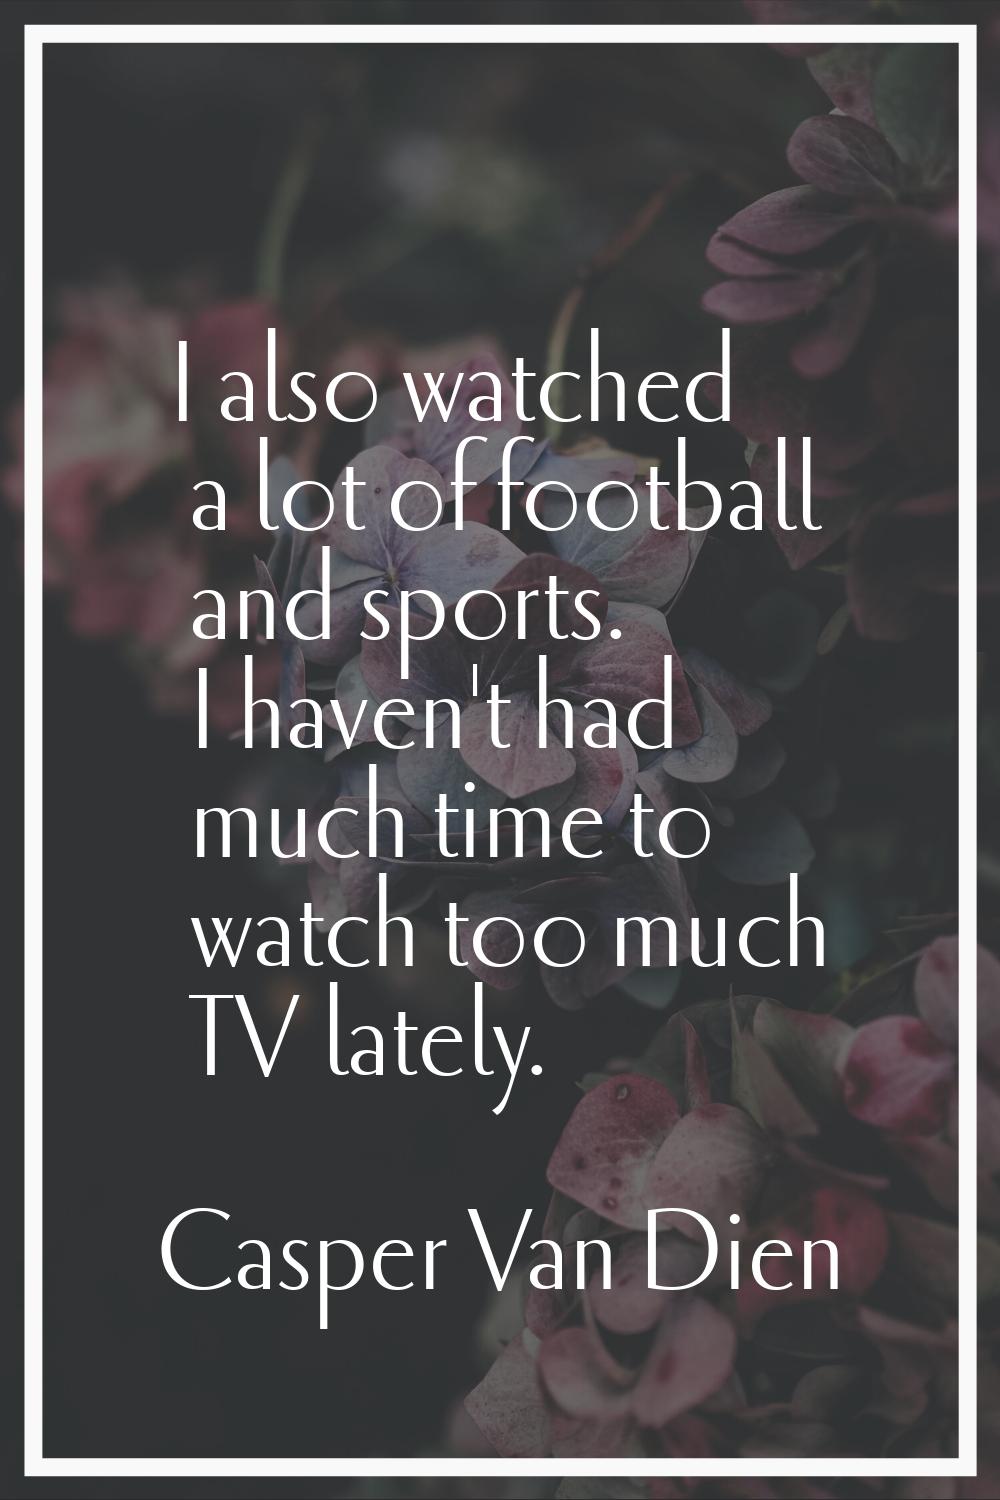 I also watched a lot of football and sports. I haven't had much time to watch too much TV lately.